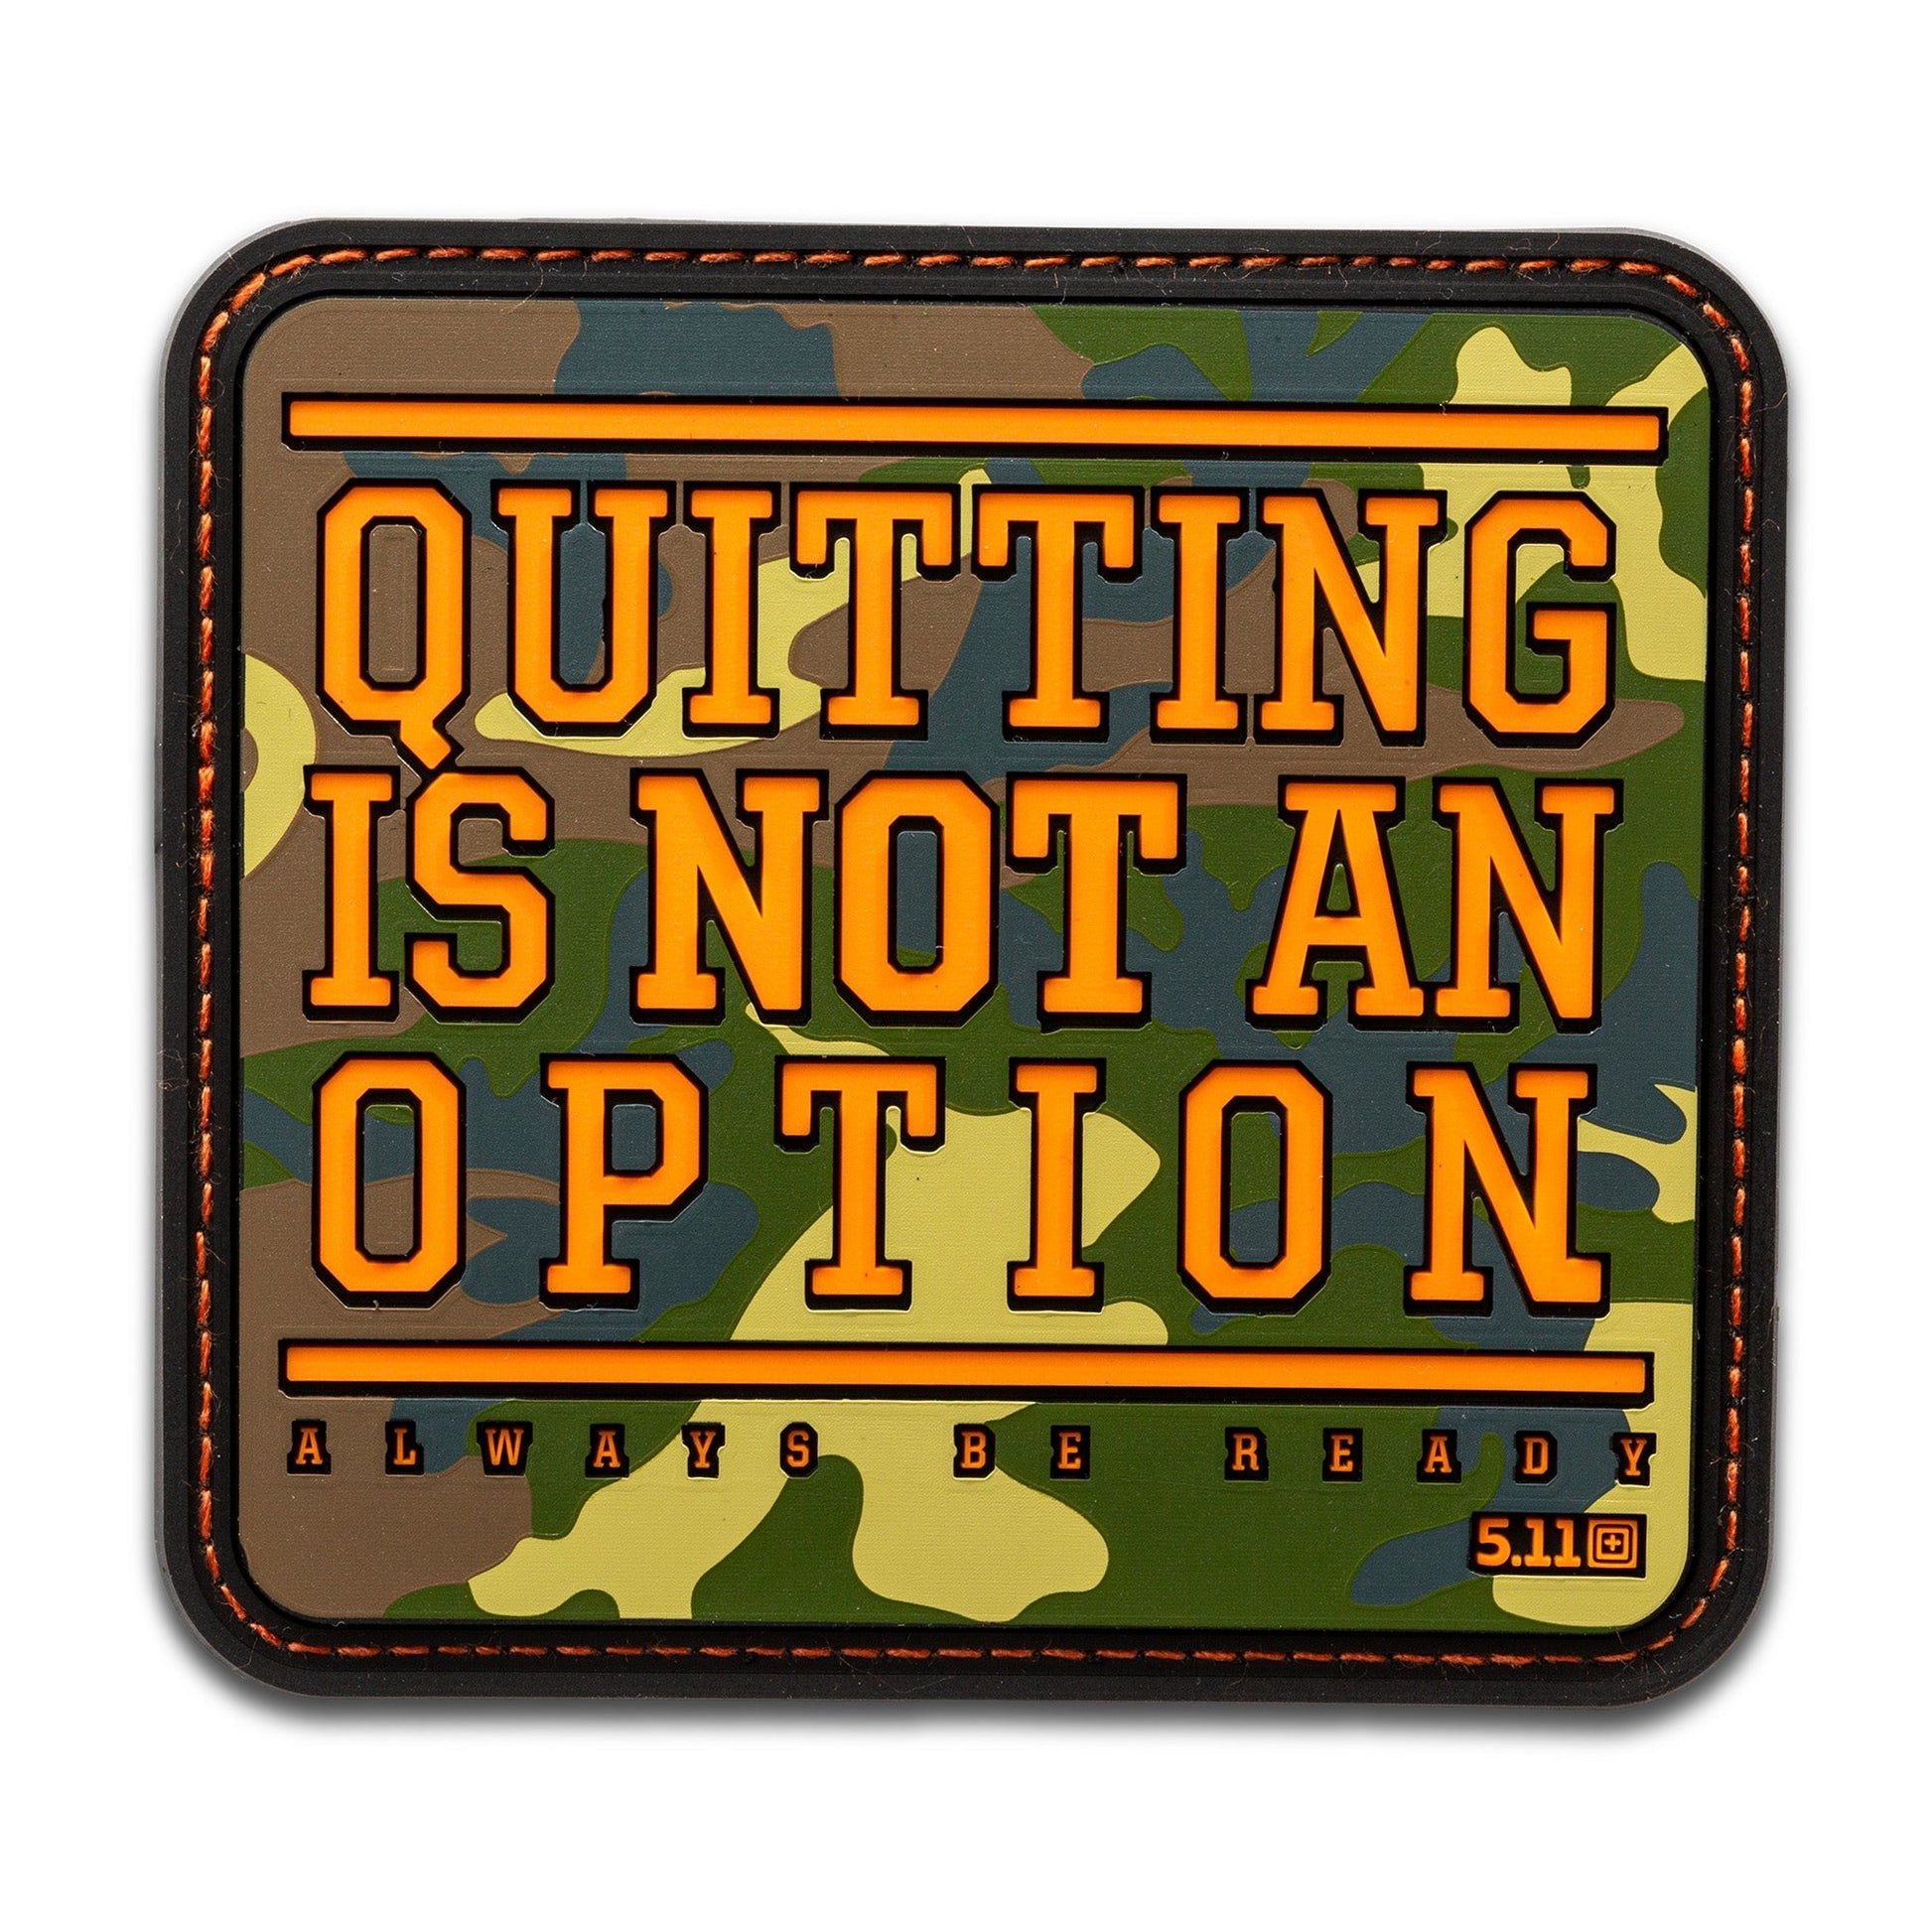 5.11 Tactical Quitting Is Not an Option Patch Tactical Distributors Ltd New Zealand